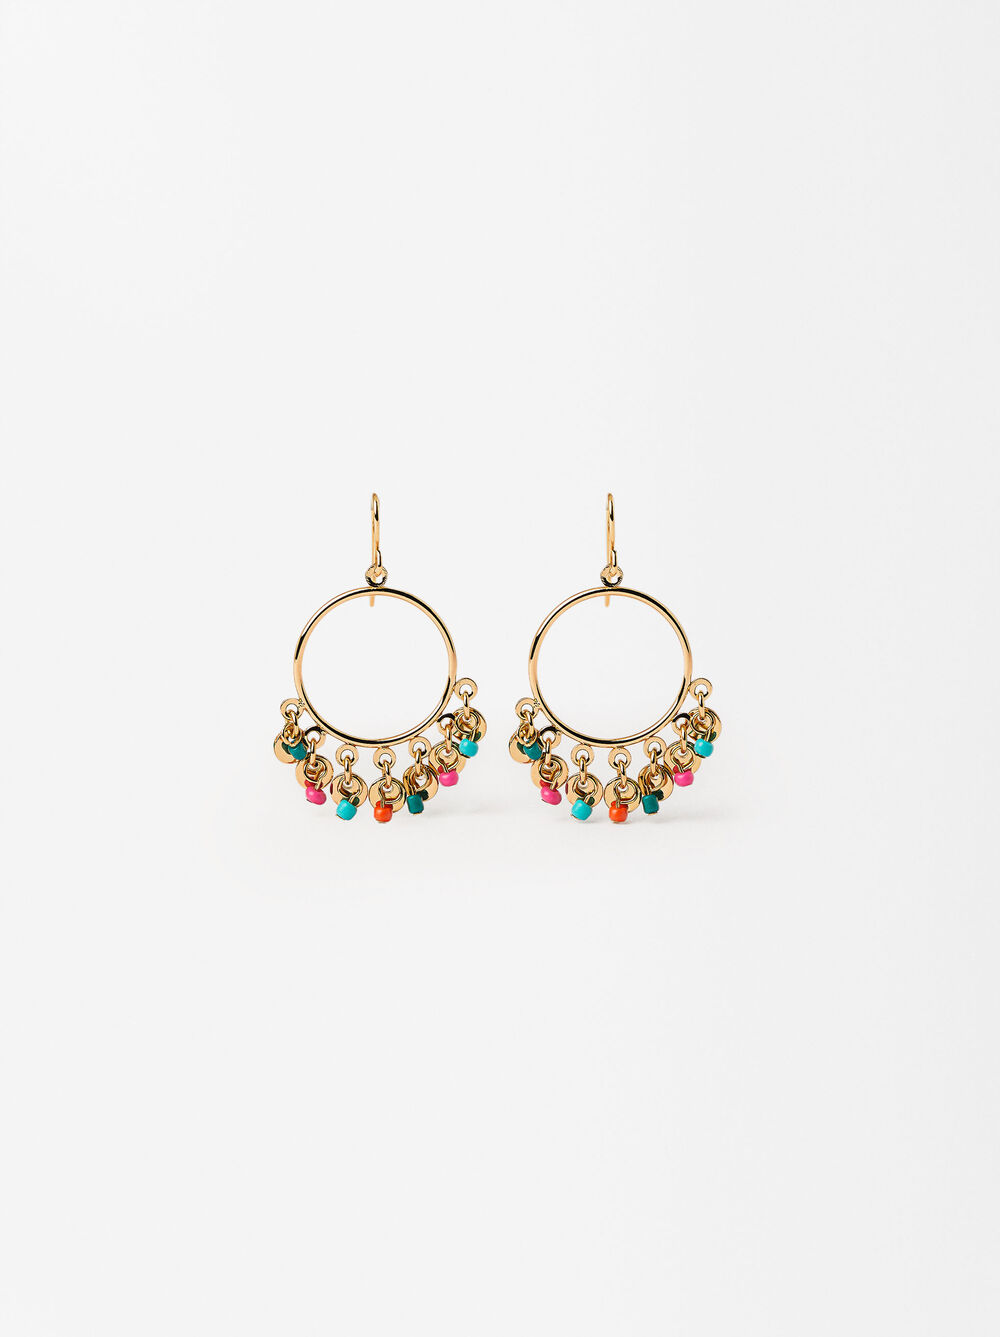 Golden Earrings With Beads